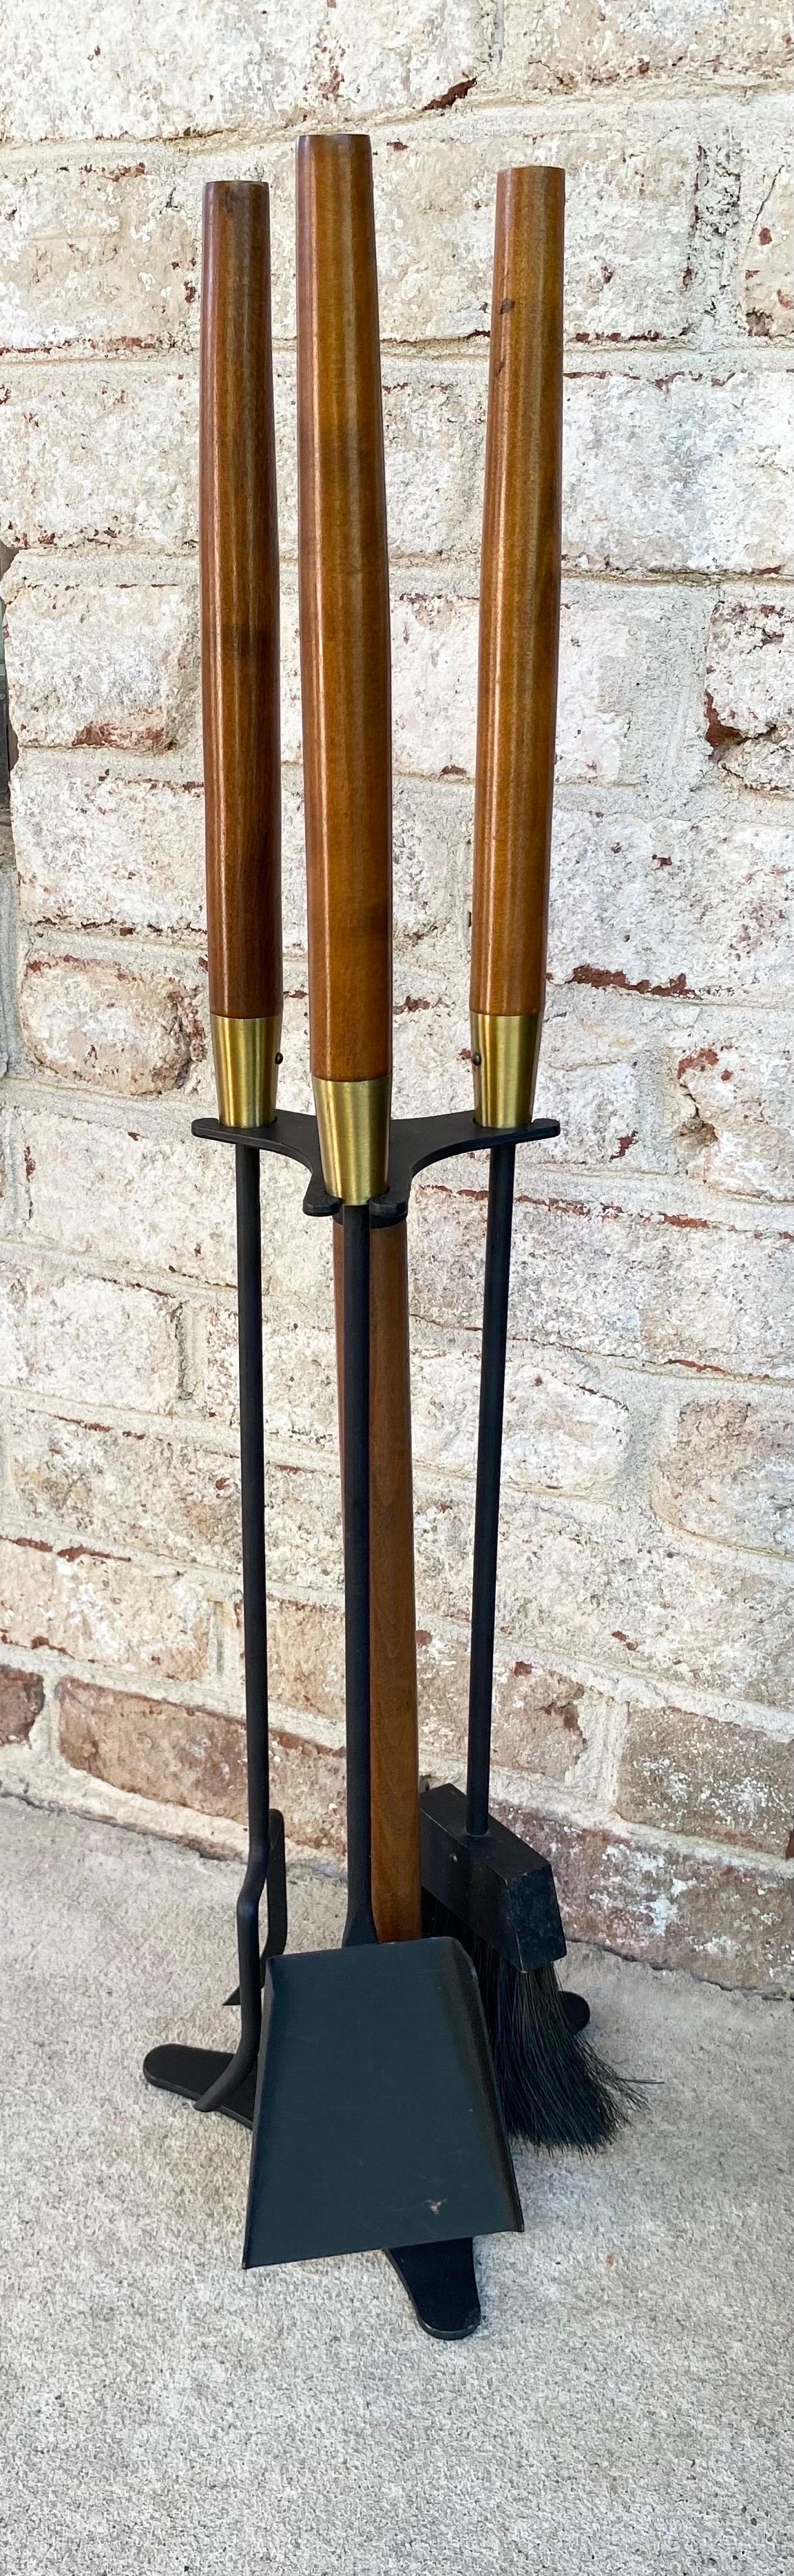 Wood handled modern set of fireplace tools.....

The measurements for the stand are 20.5